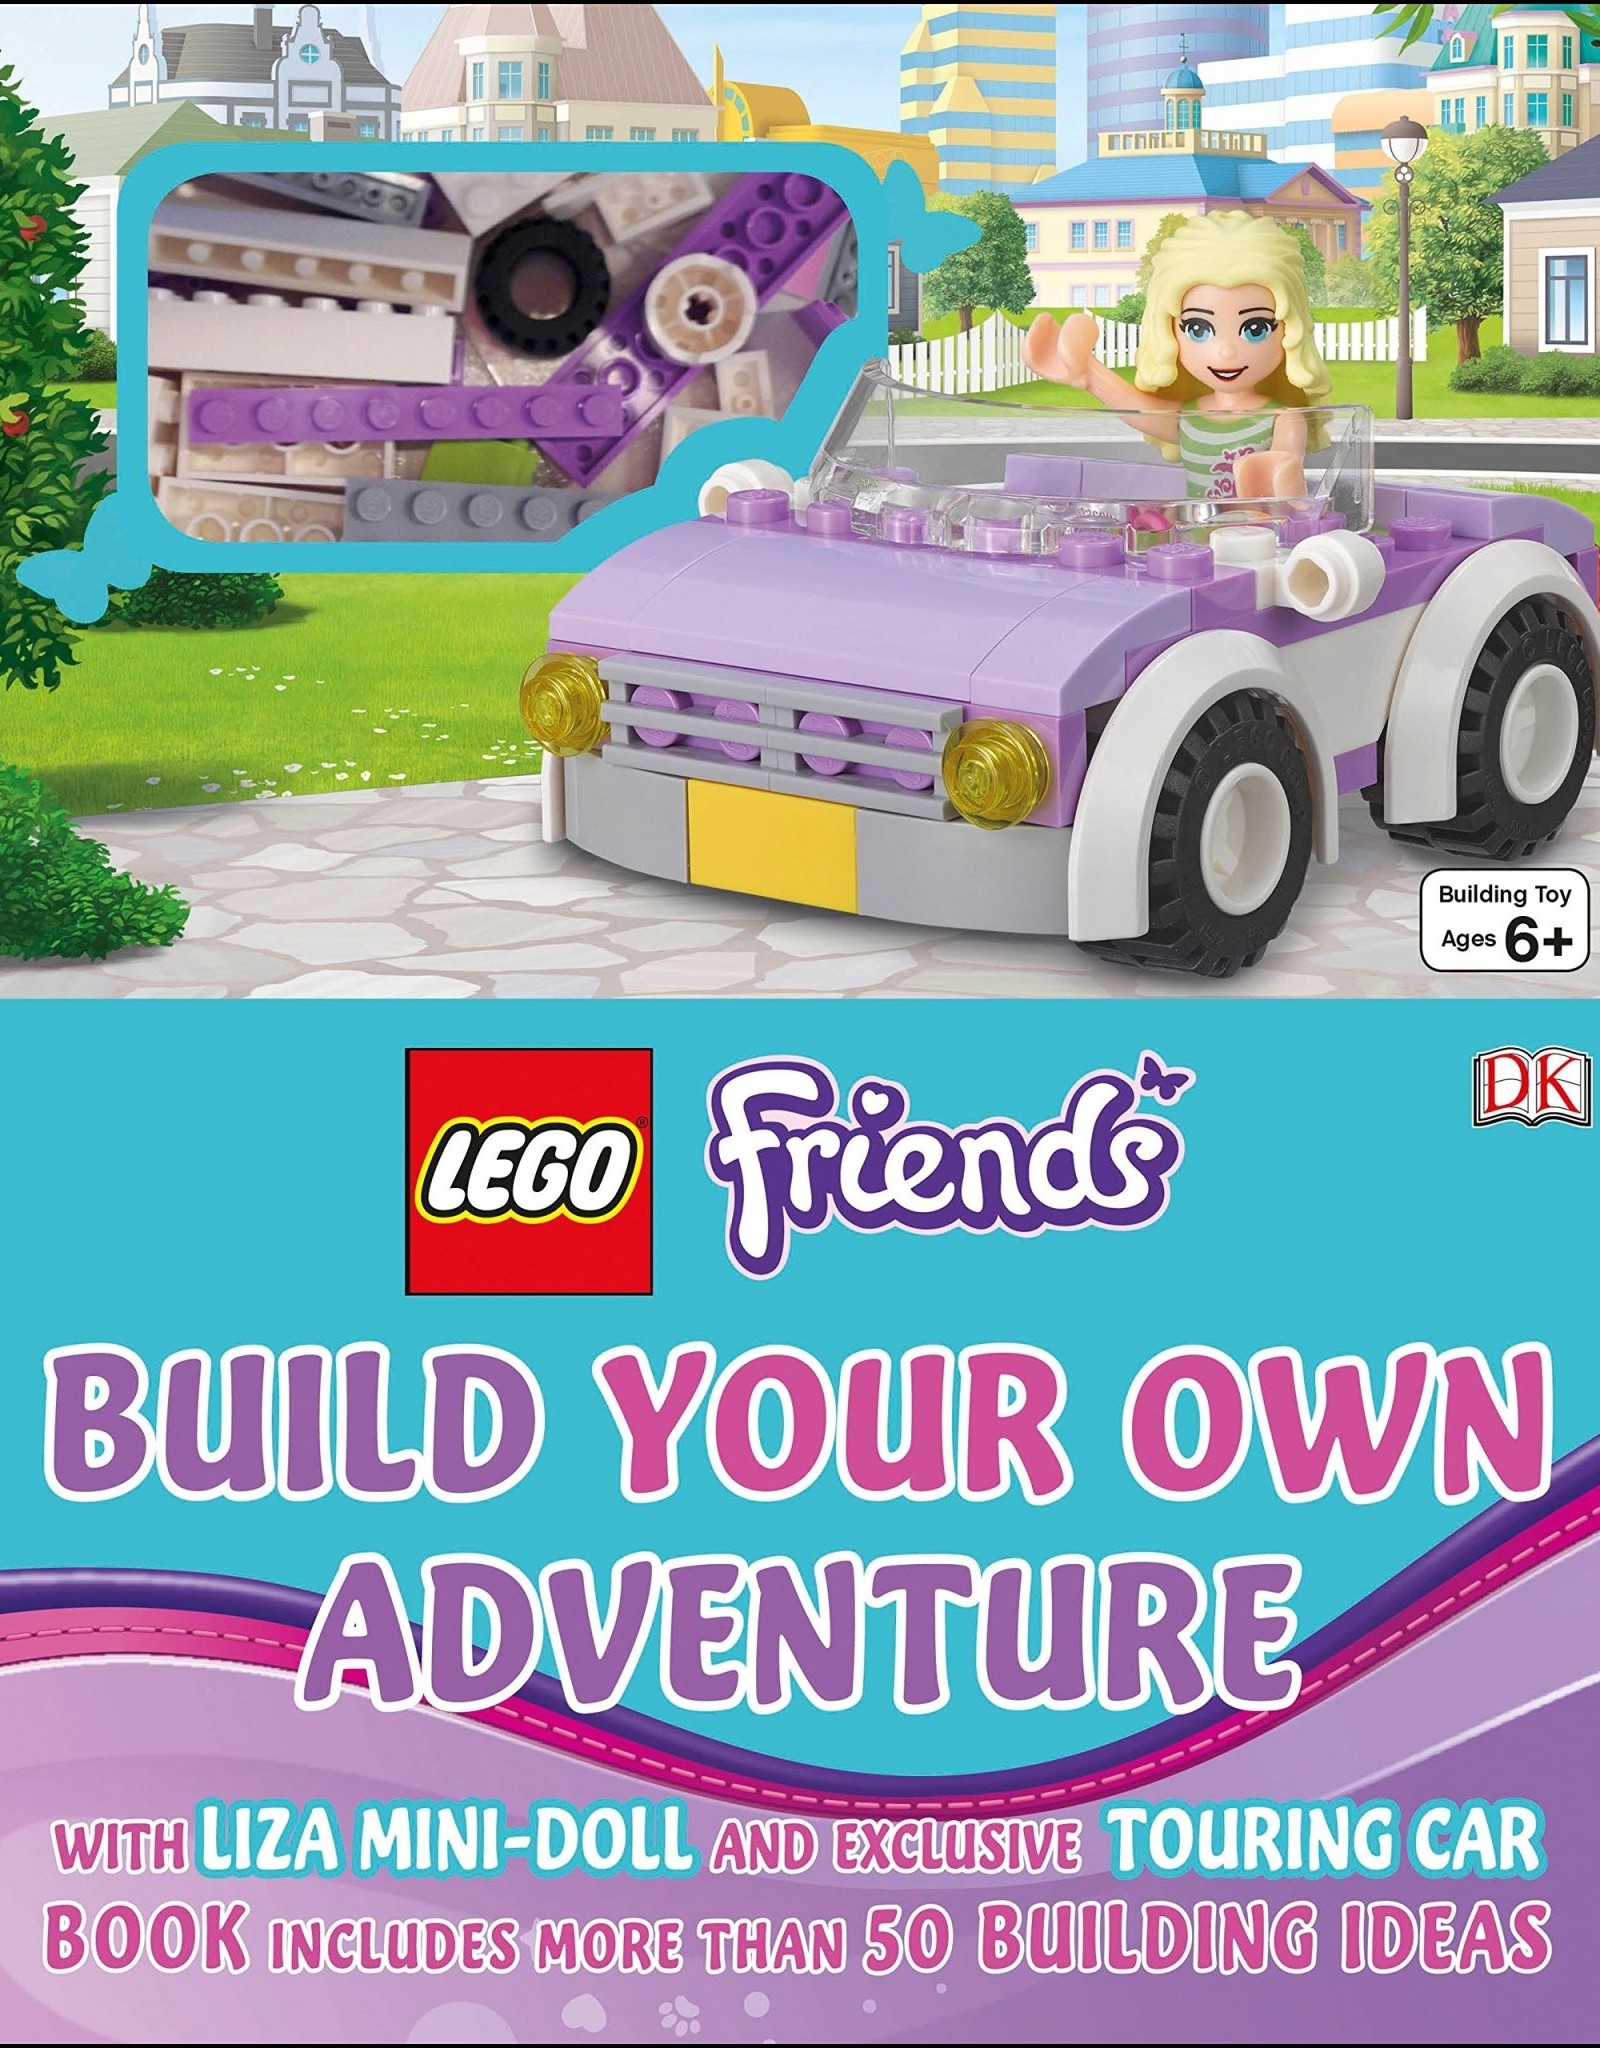 LEGO Classic LEGO Friends Build Your Own Adventure Book and Lego Set